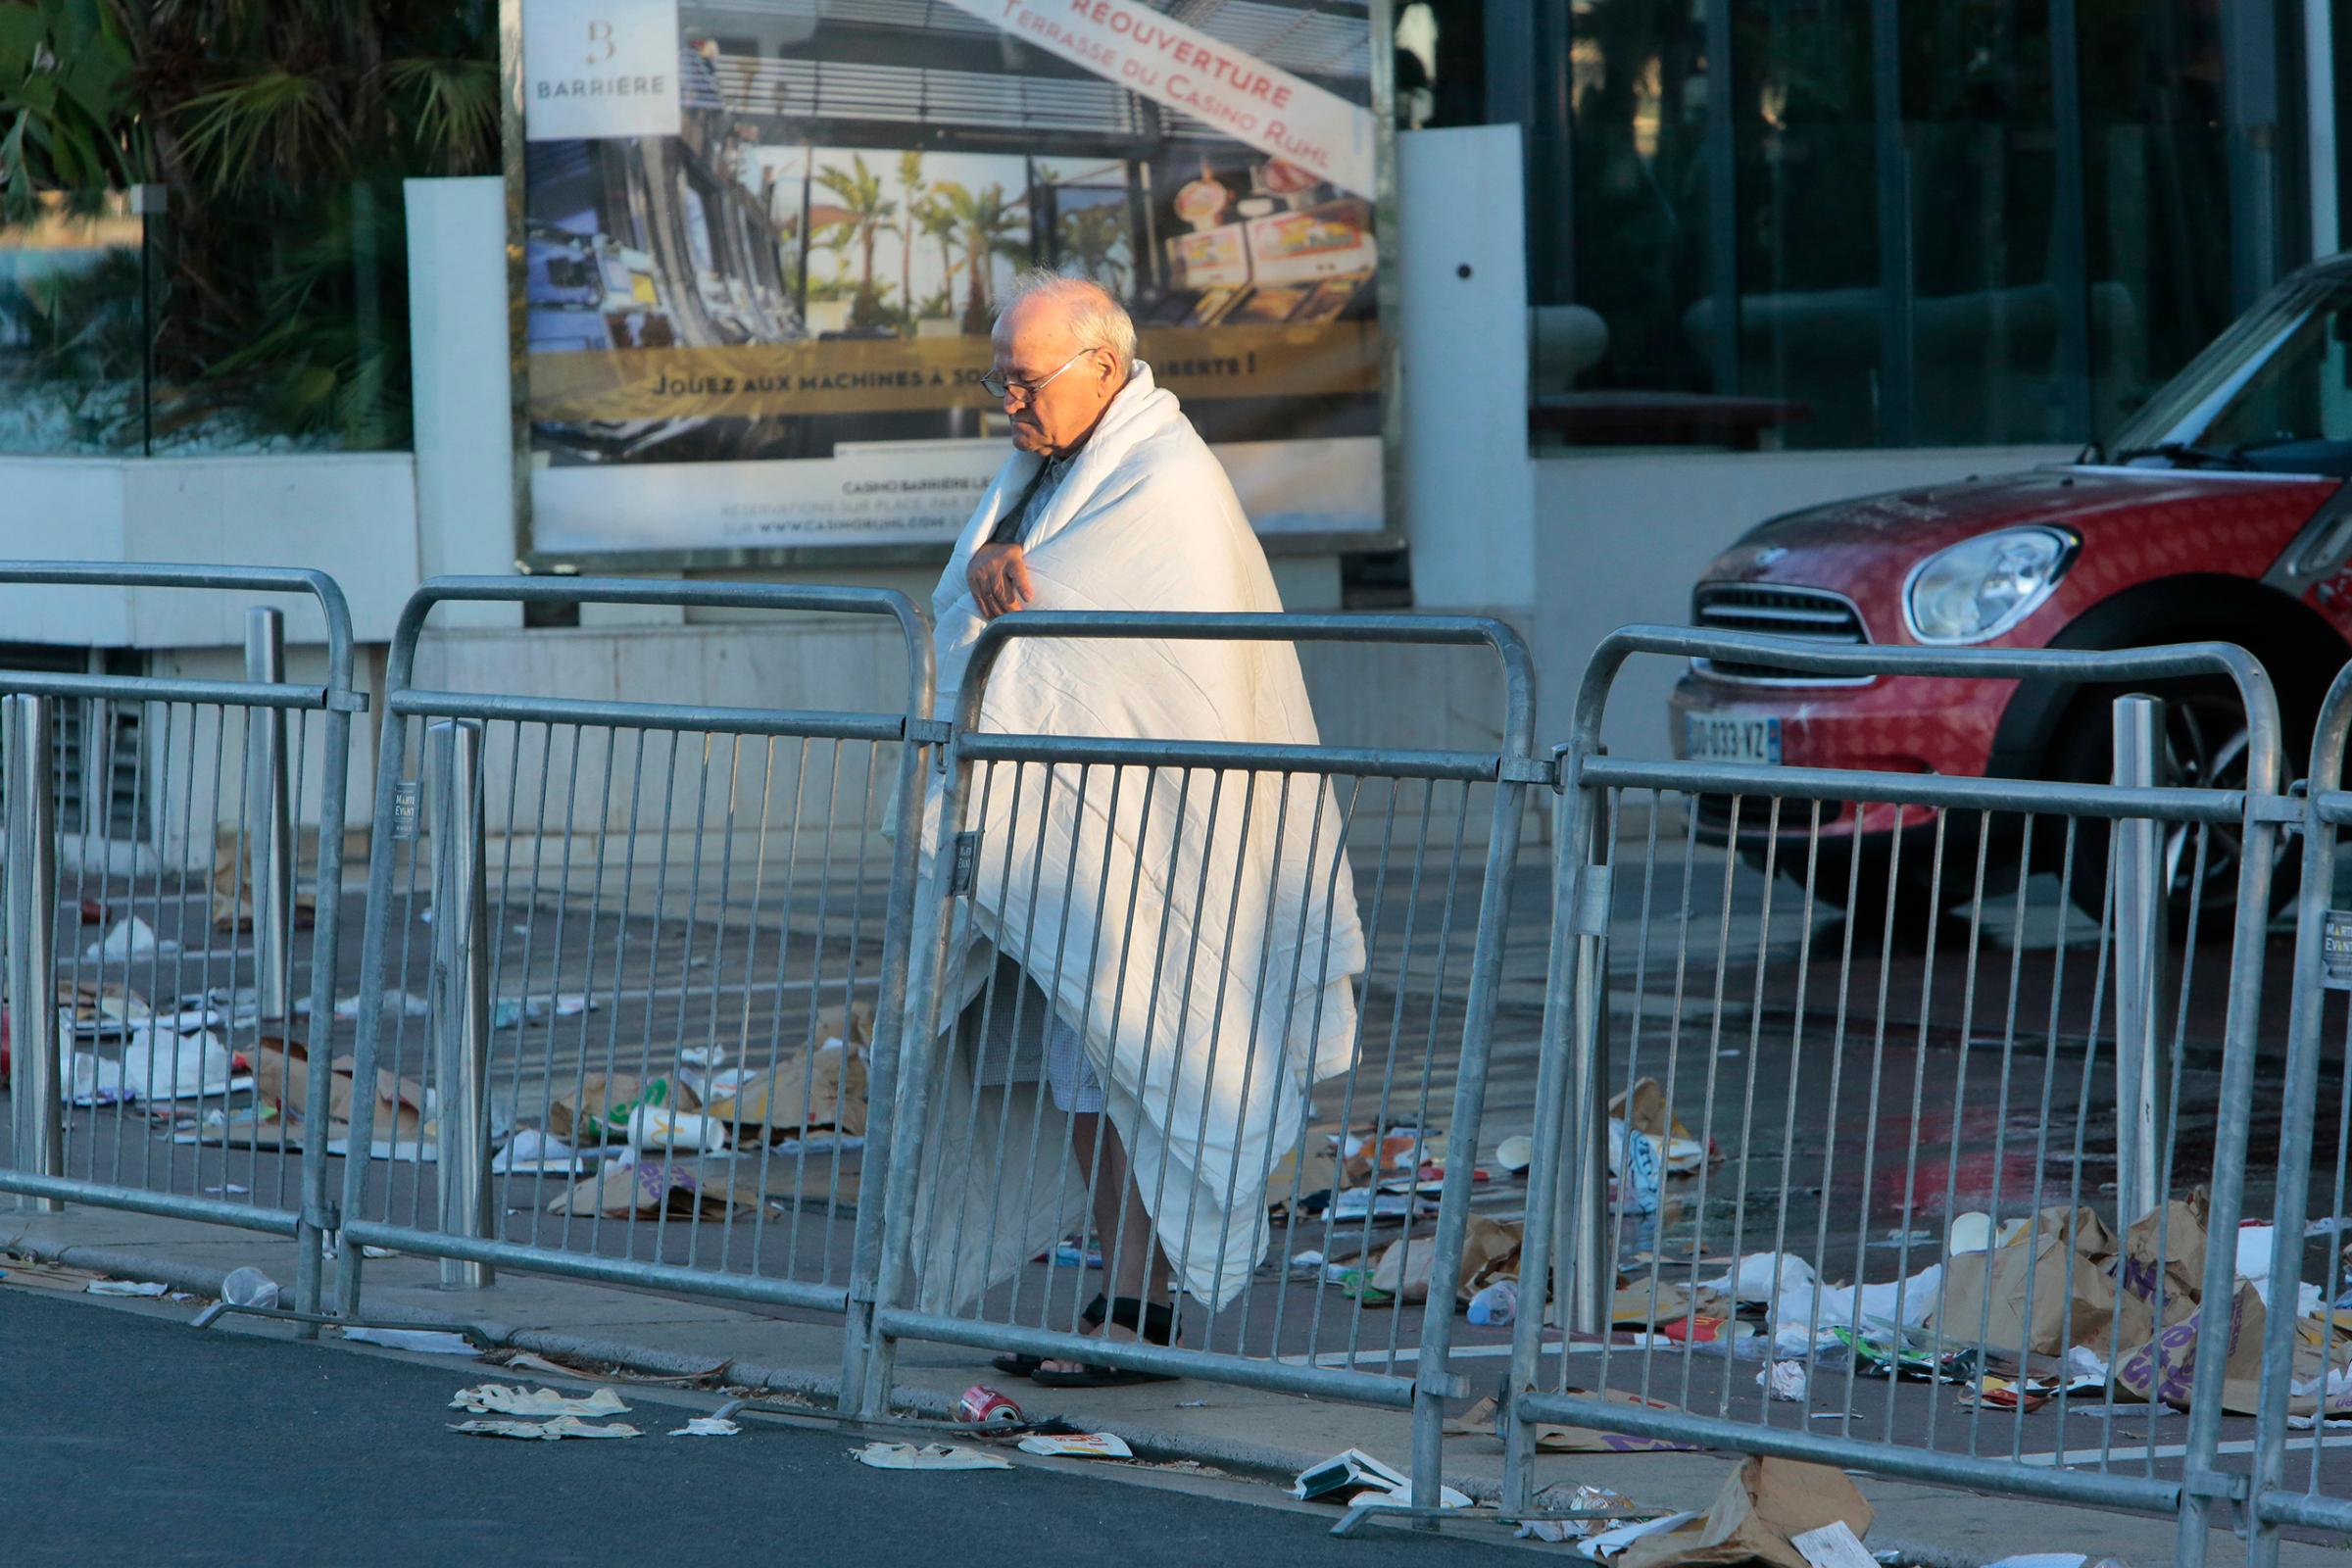 A man at the scene of the truck attack in Nice, France, on July 15, 2016. Authorities said a driver plowed into people celebrating Bastille Day late on Thursday, killing at least 84 people.